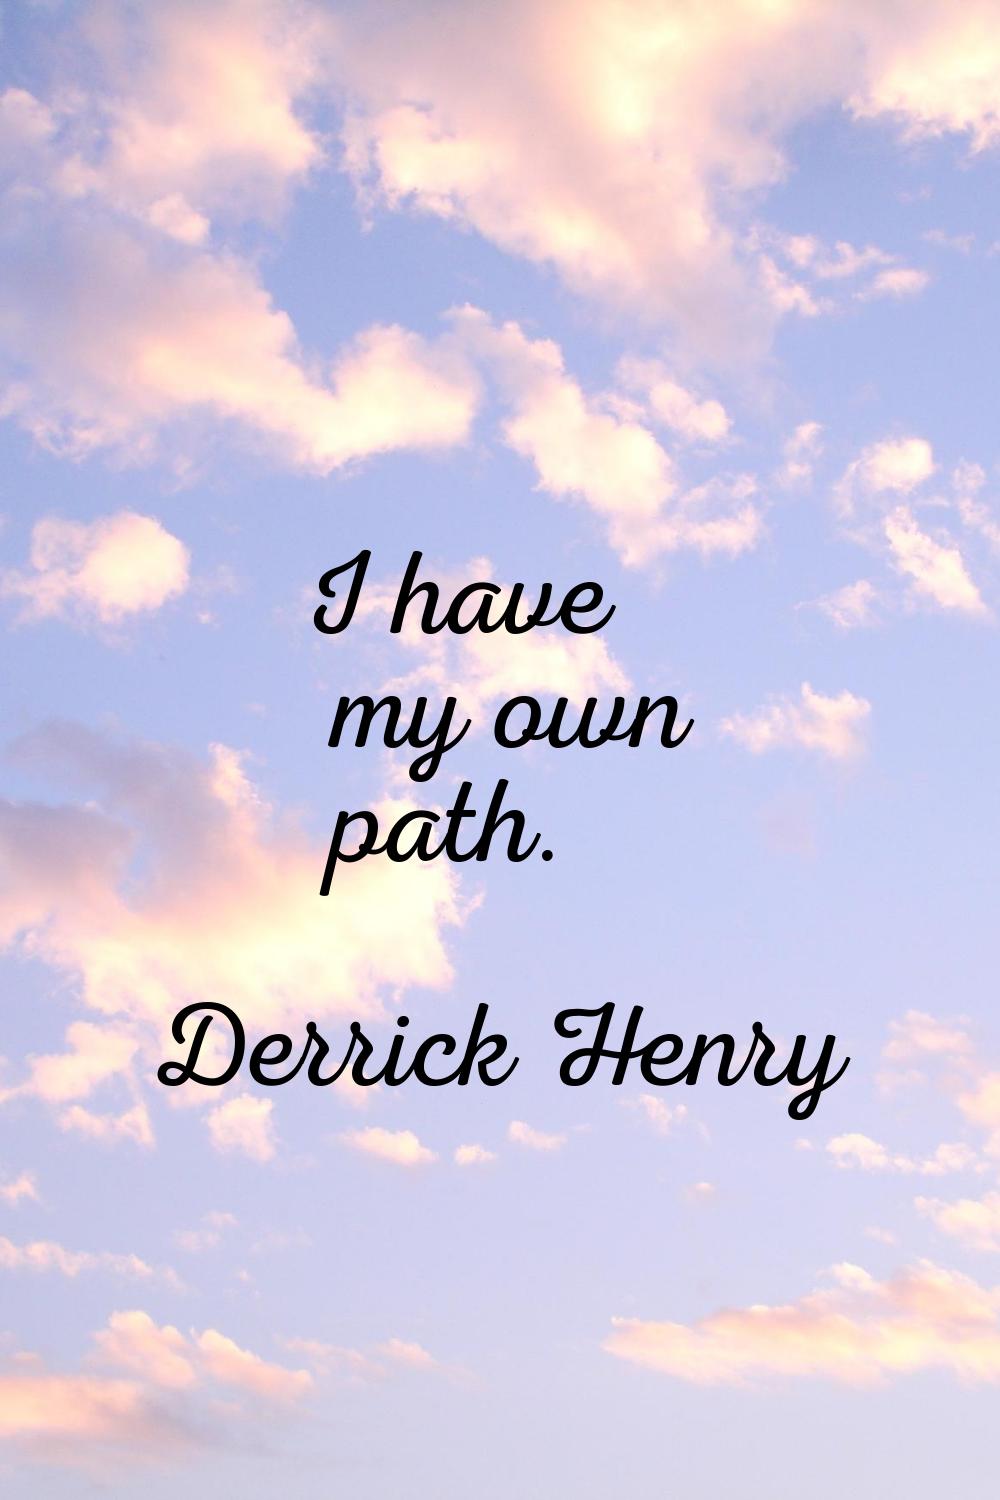 I have my own path.